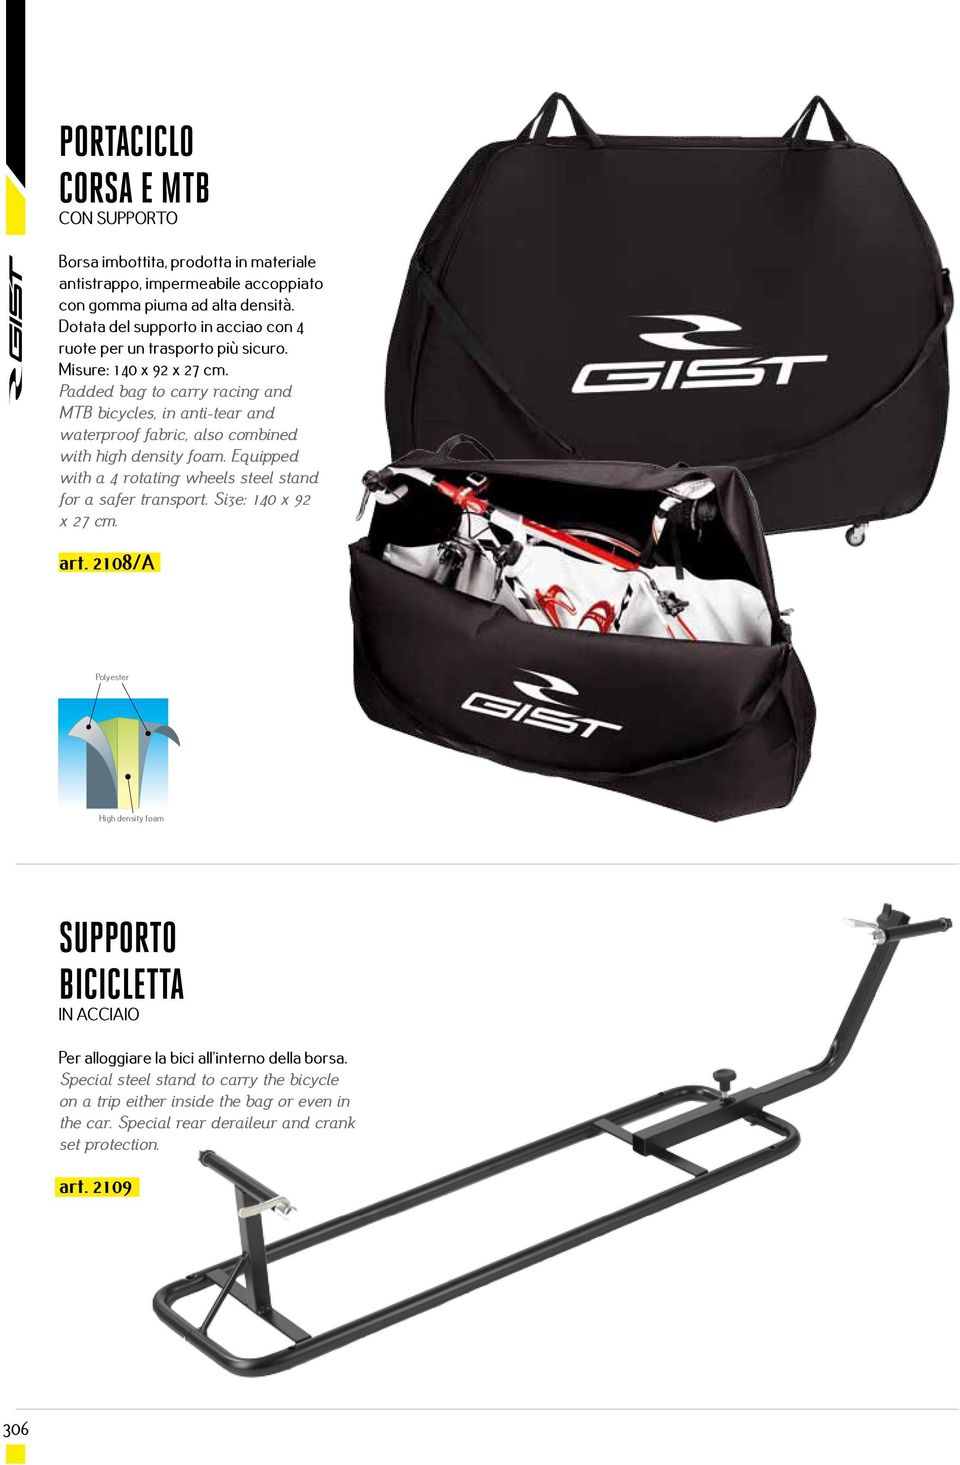 Padded bag to carry racing and MTB bicycles, in anti-tear and waterproof fabric, also combined with high density foam.